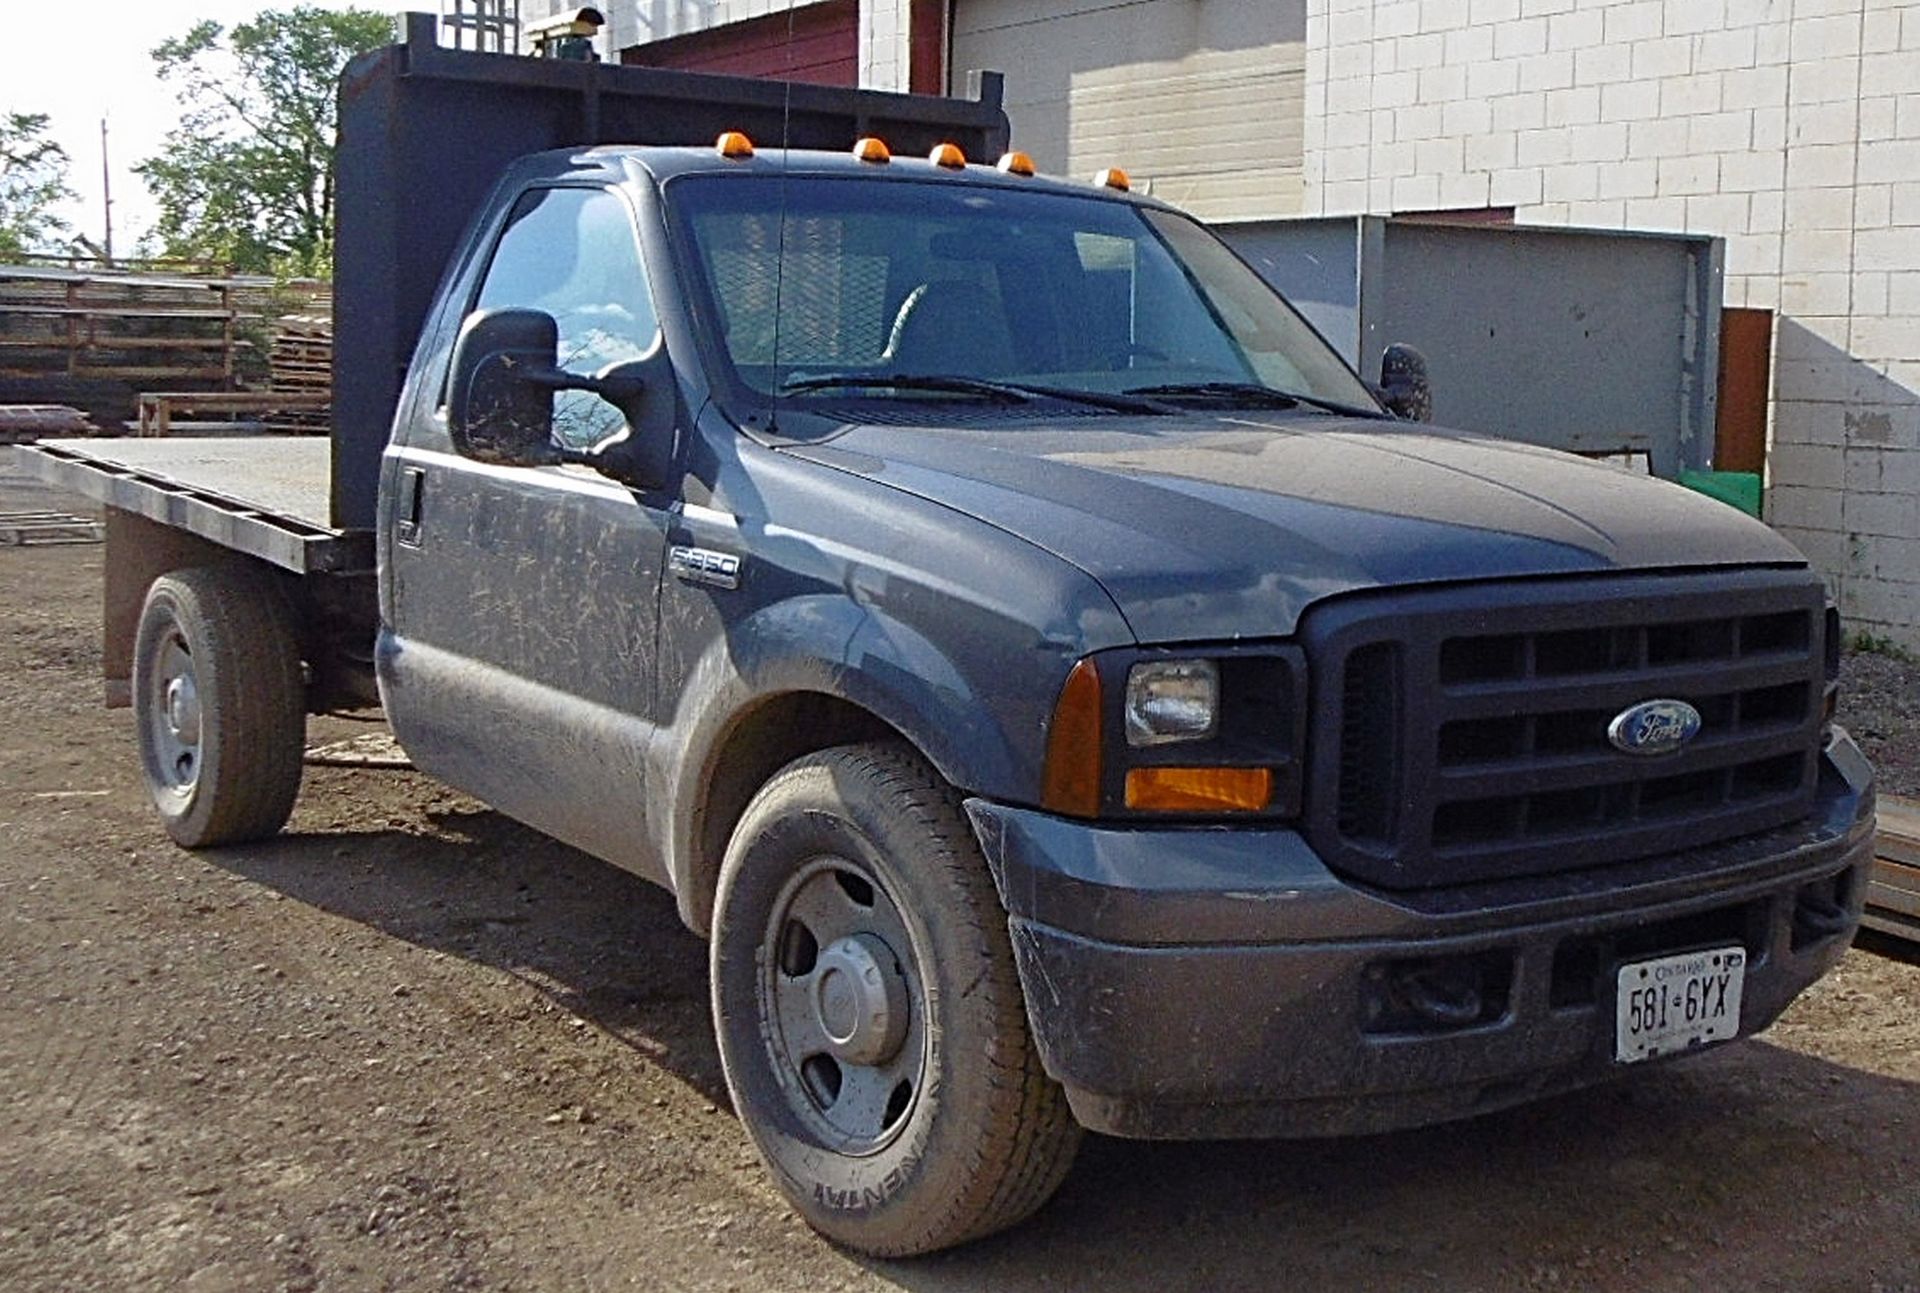 FORD F-350XL SUPER DUTY FLAT BED TRUCK WITH 171,141KM (RECORDED ON ODOMETER) VIN: IFD5F34526EC59613